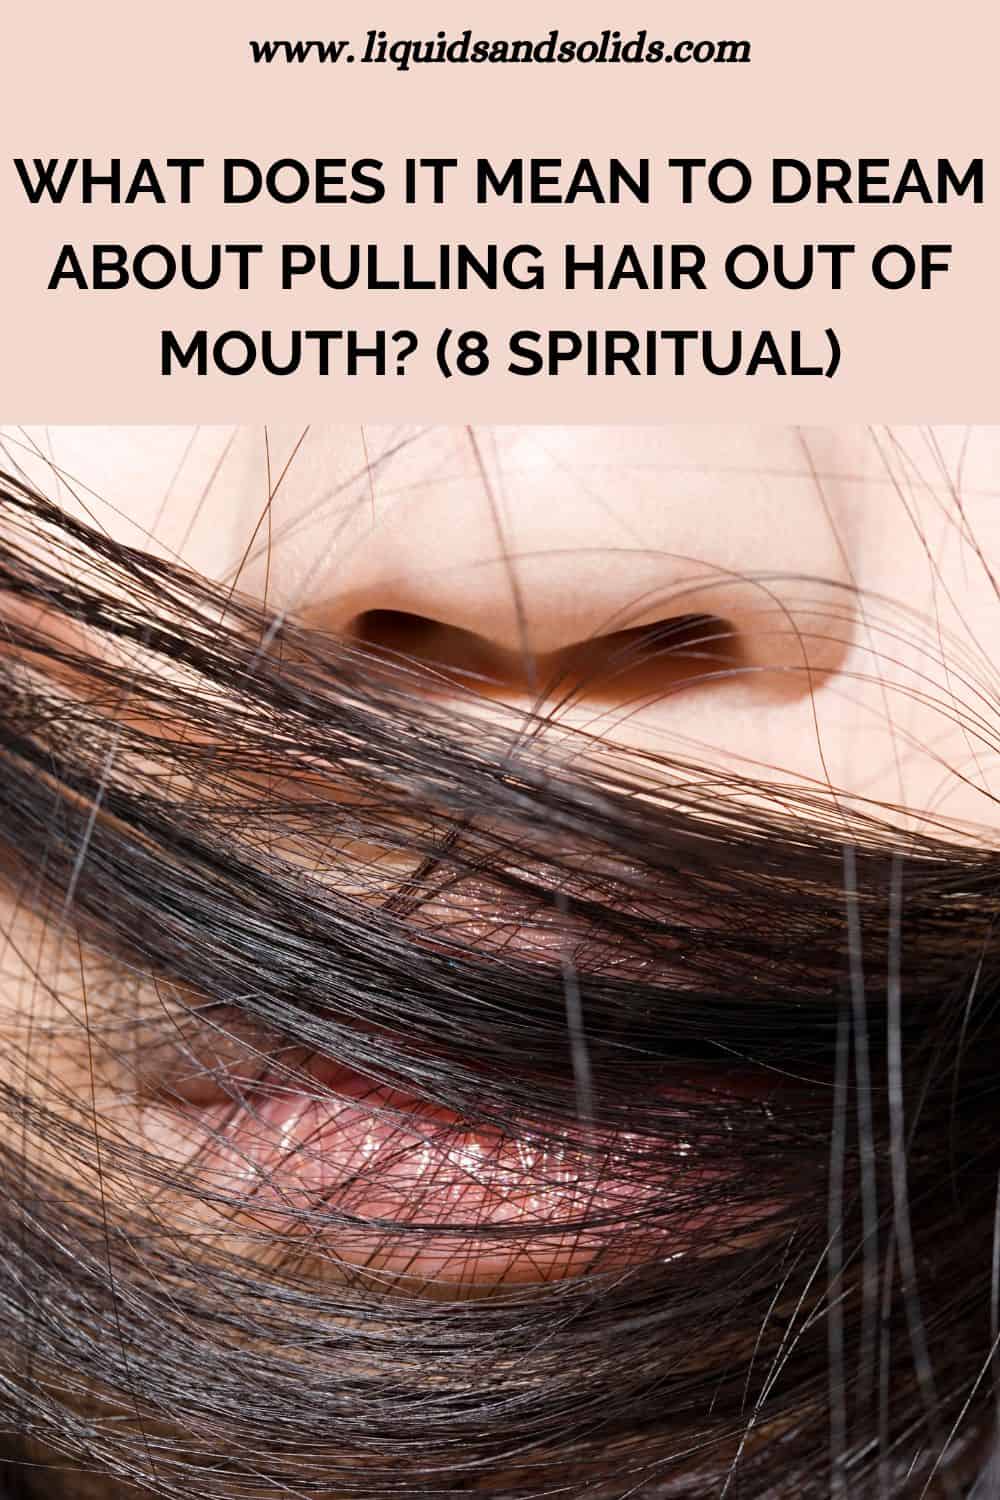 Dream of Pulling Hair Out Of Mouth? (8 Spiritual Meanings)